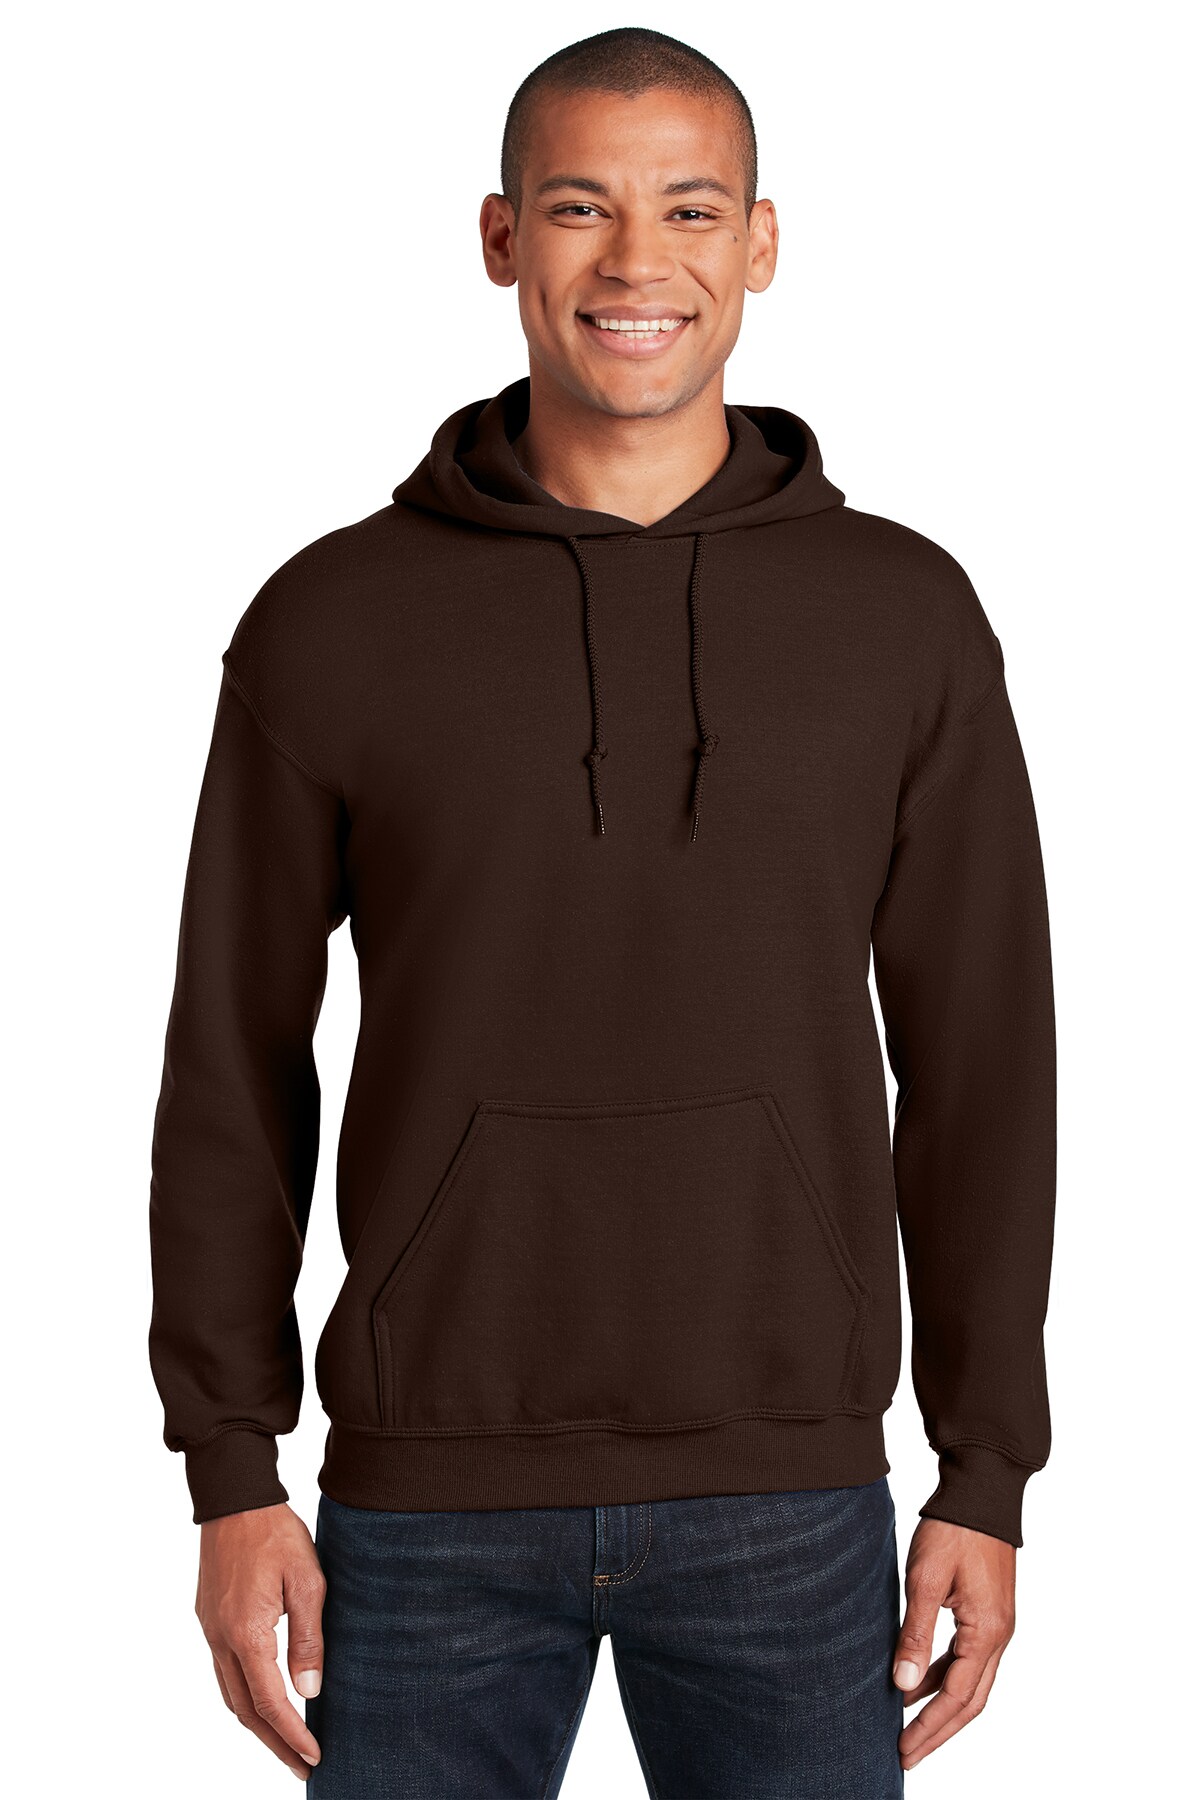 Gildan - Heavy Blend Hooded Sweatshirt, 8-Ounce Cotton/Poly Fabrication  for Ultimate Comfort and Style, Experience the luxury of coziness with the  Gildan Heavy Blend Hooded Sweatshirt